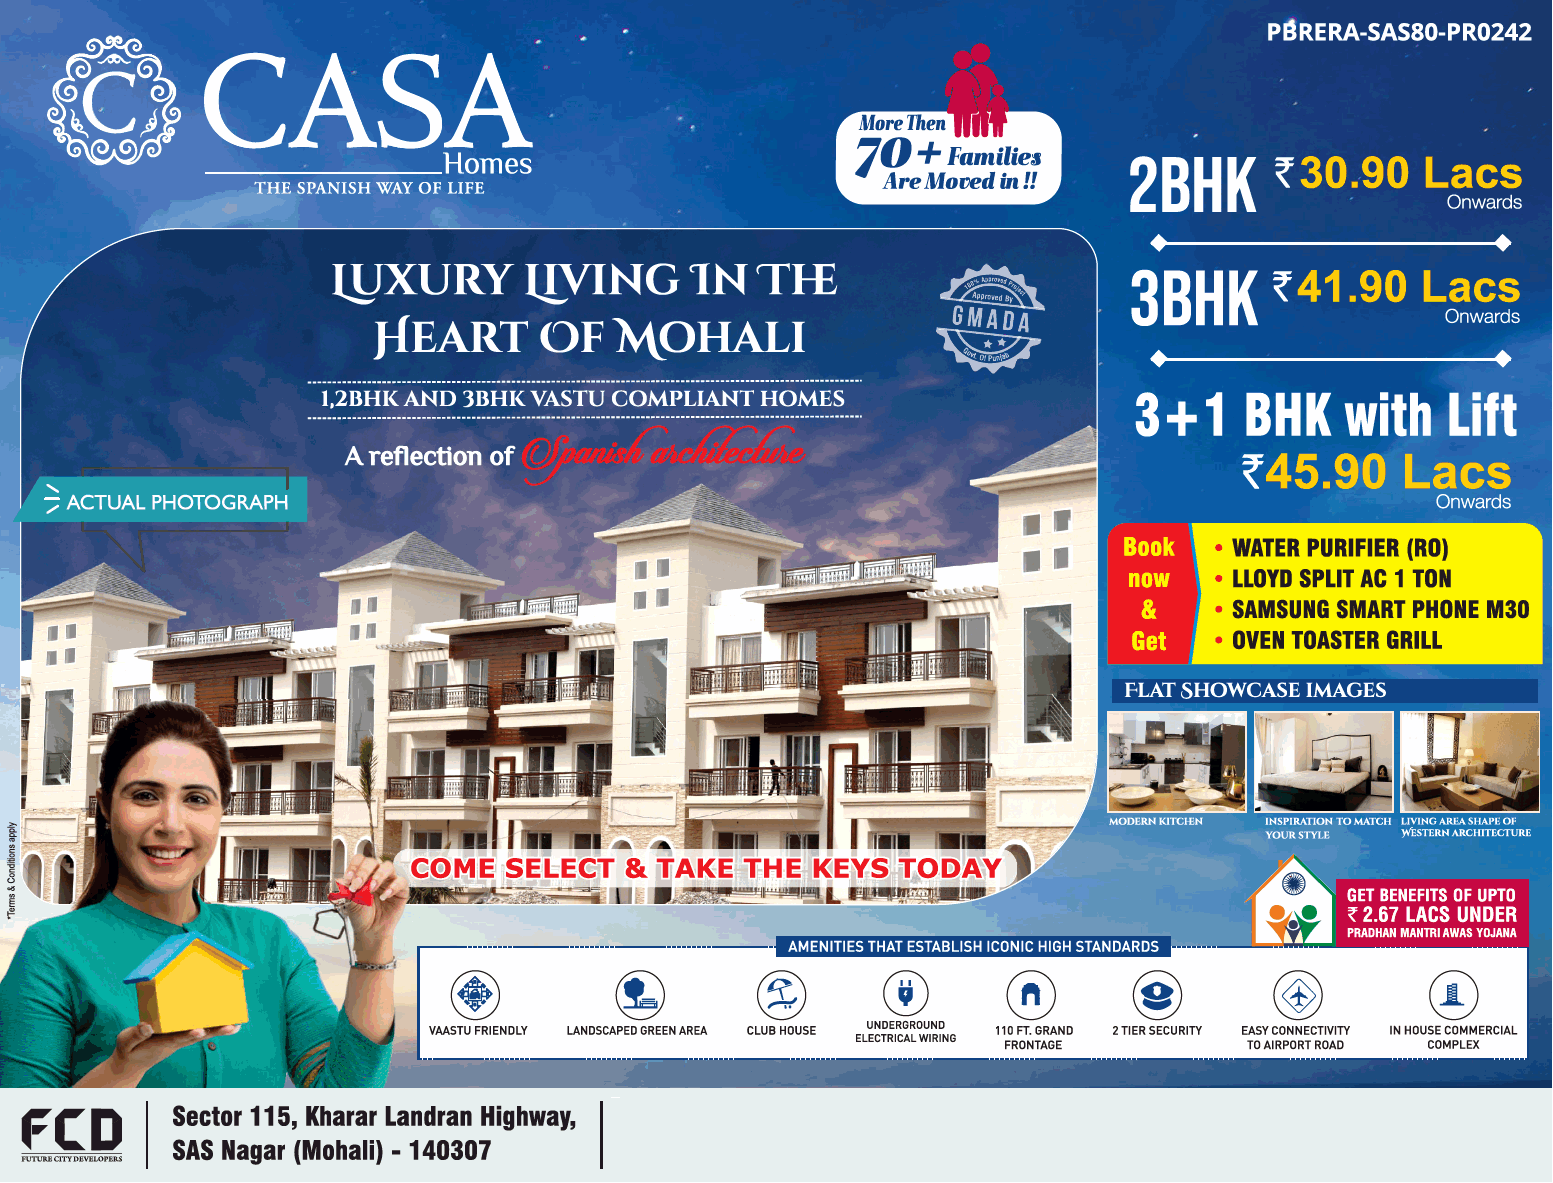 Book 1, 2 and 3 BHK vastu compliant homes at Future City Casa Homes Mohali Update